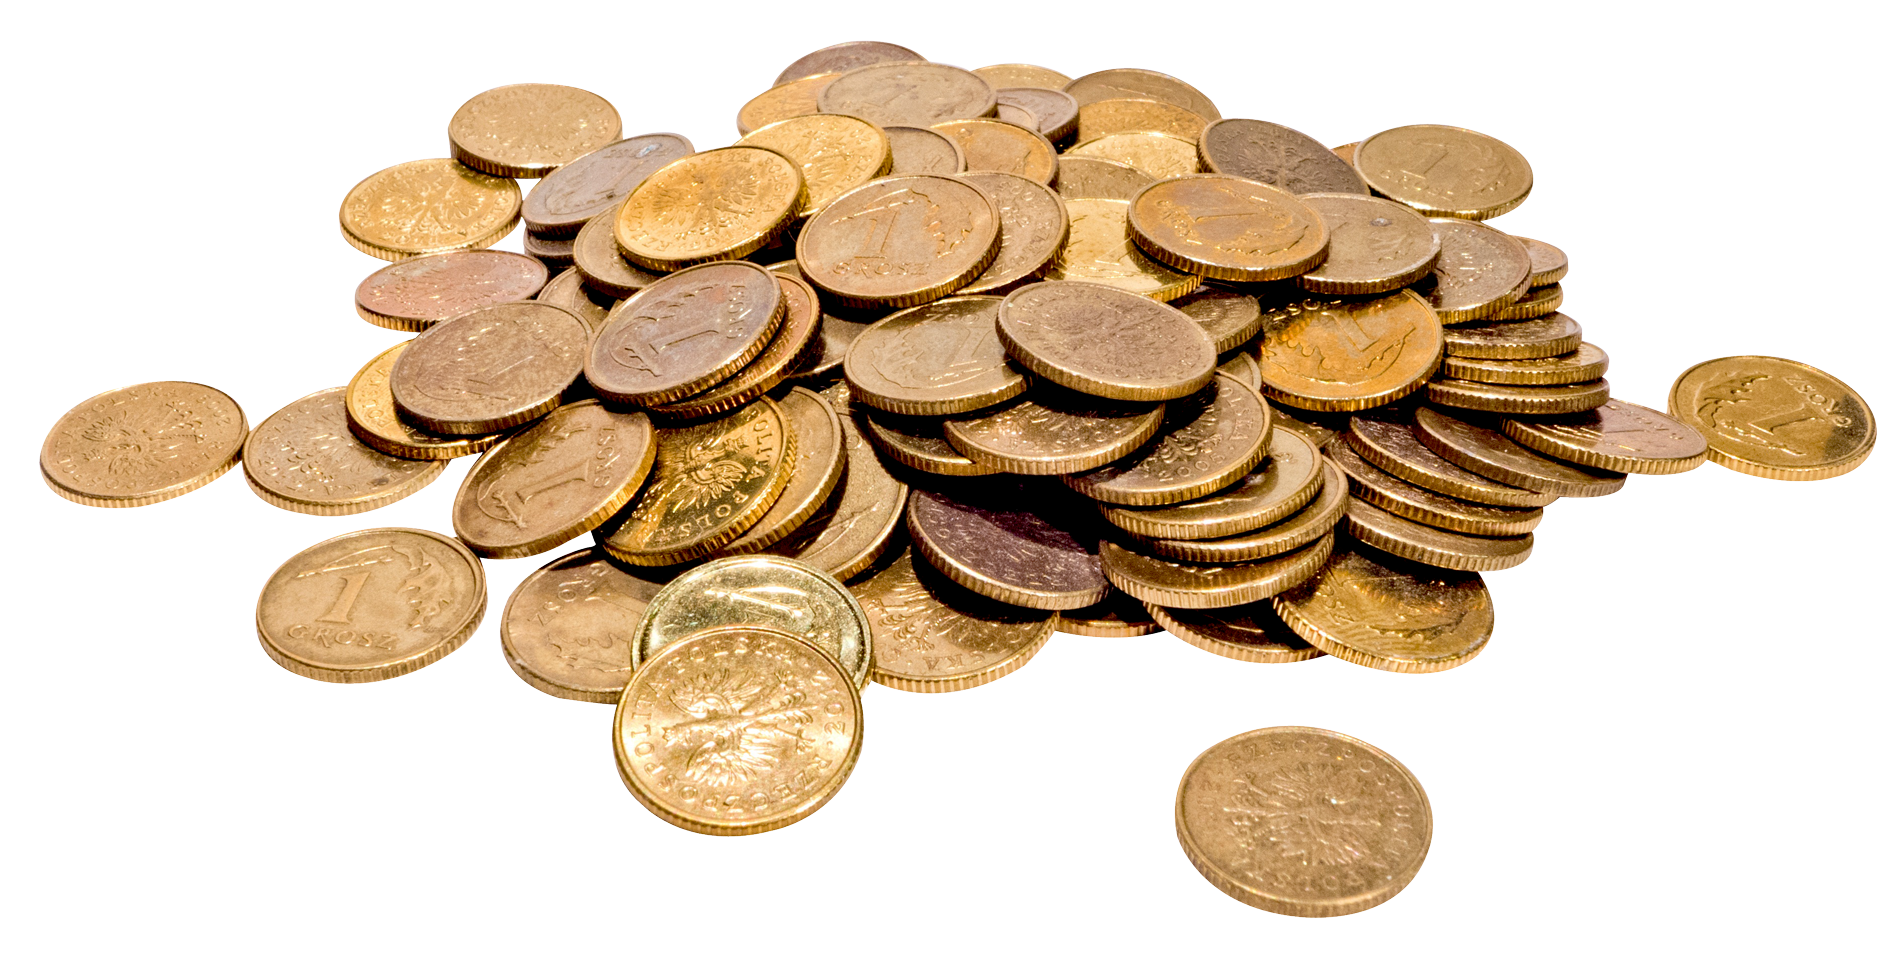 Start Collecting Rare Coins